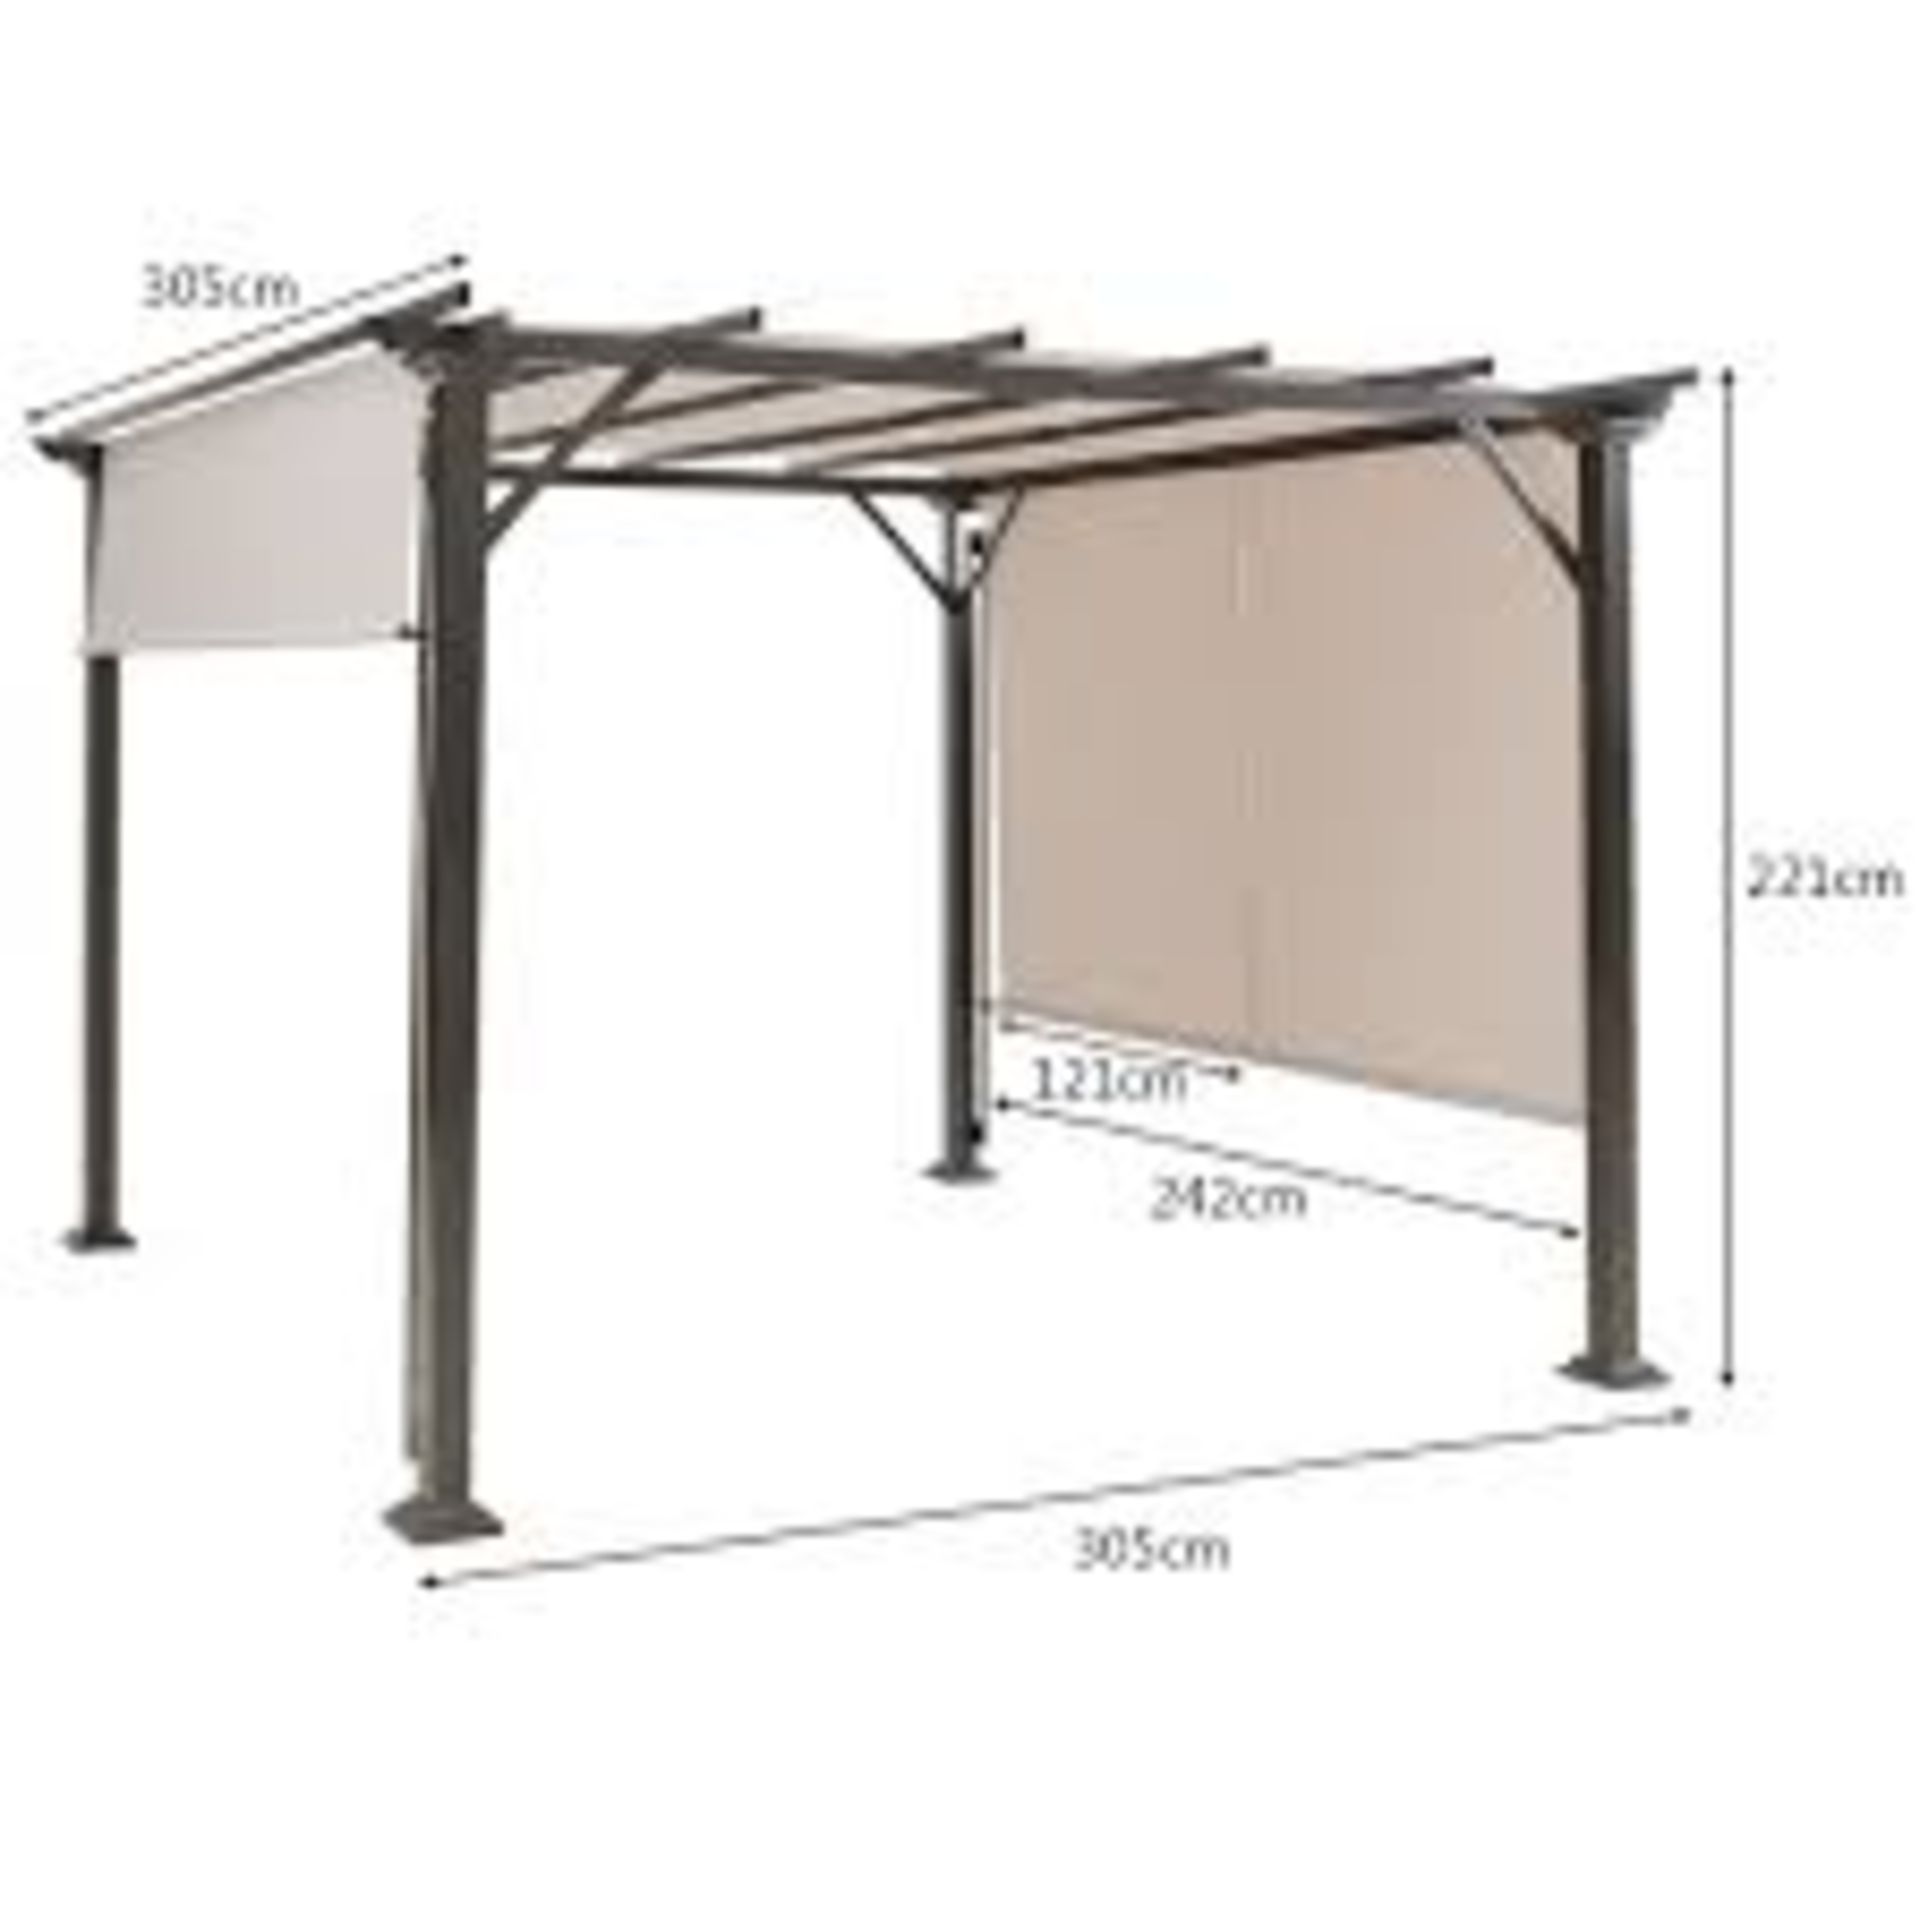 2PCS 16x4 Ft Universal Replacement Canopy for Pergola. - R14.7.